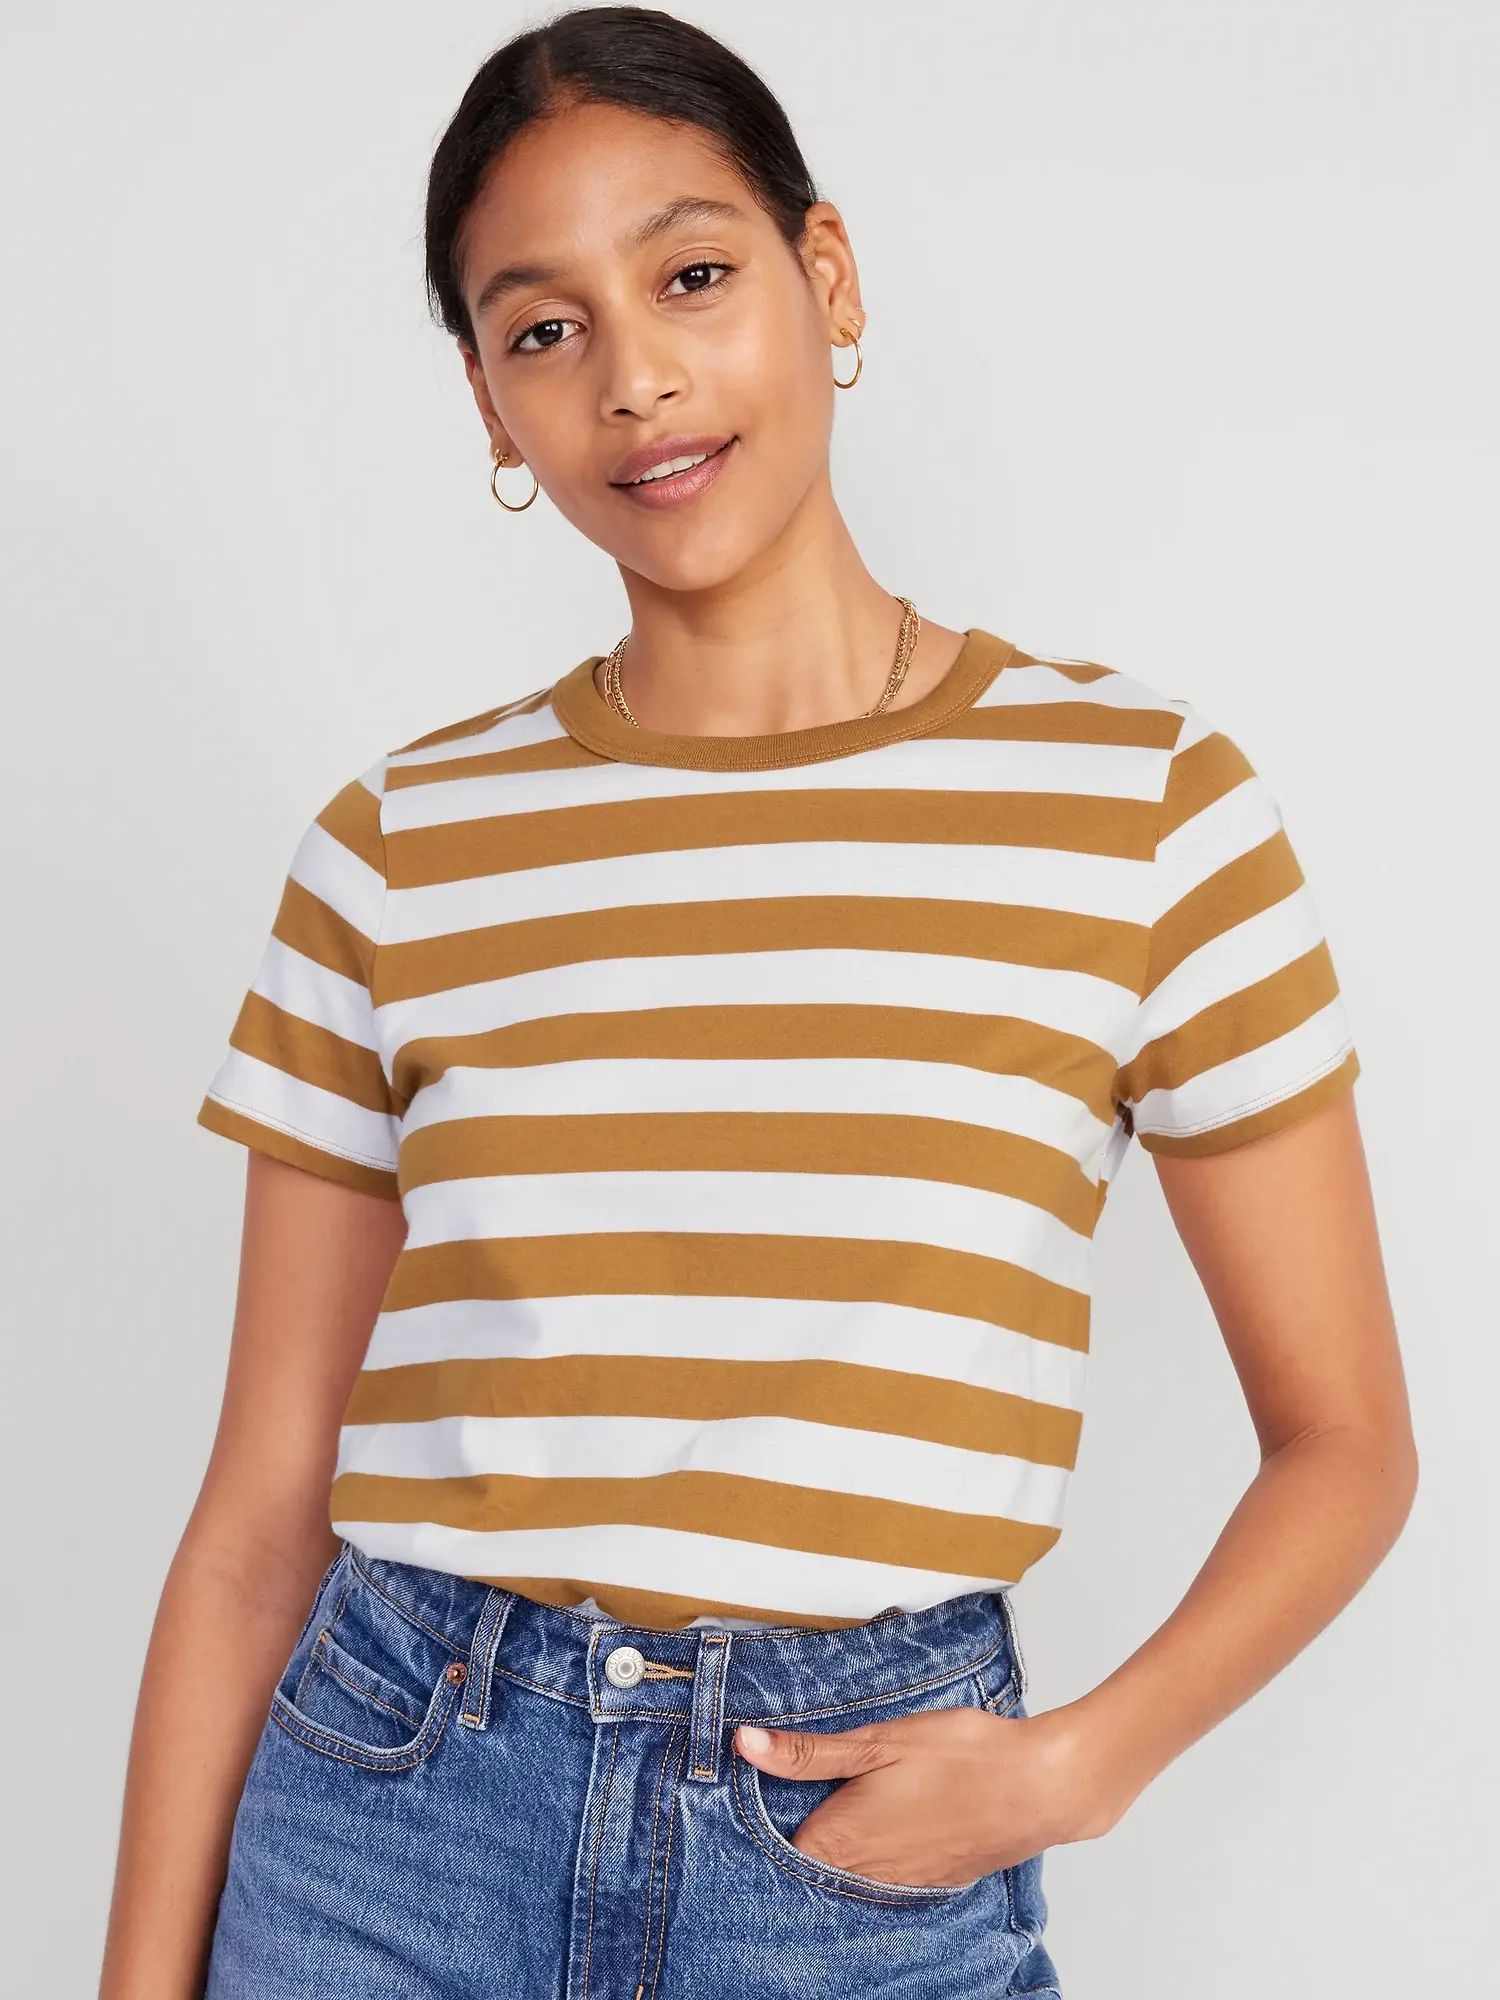 Old Navy EveryWear Striped T-Shirt for Women brown. 1